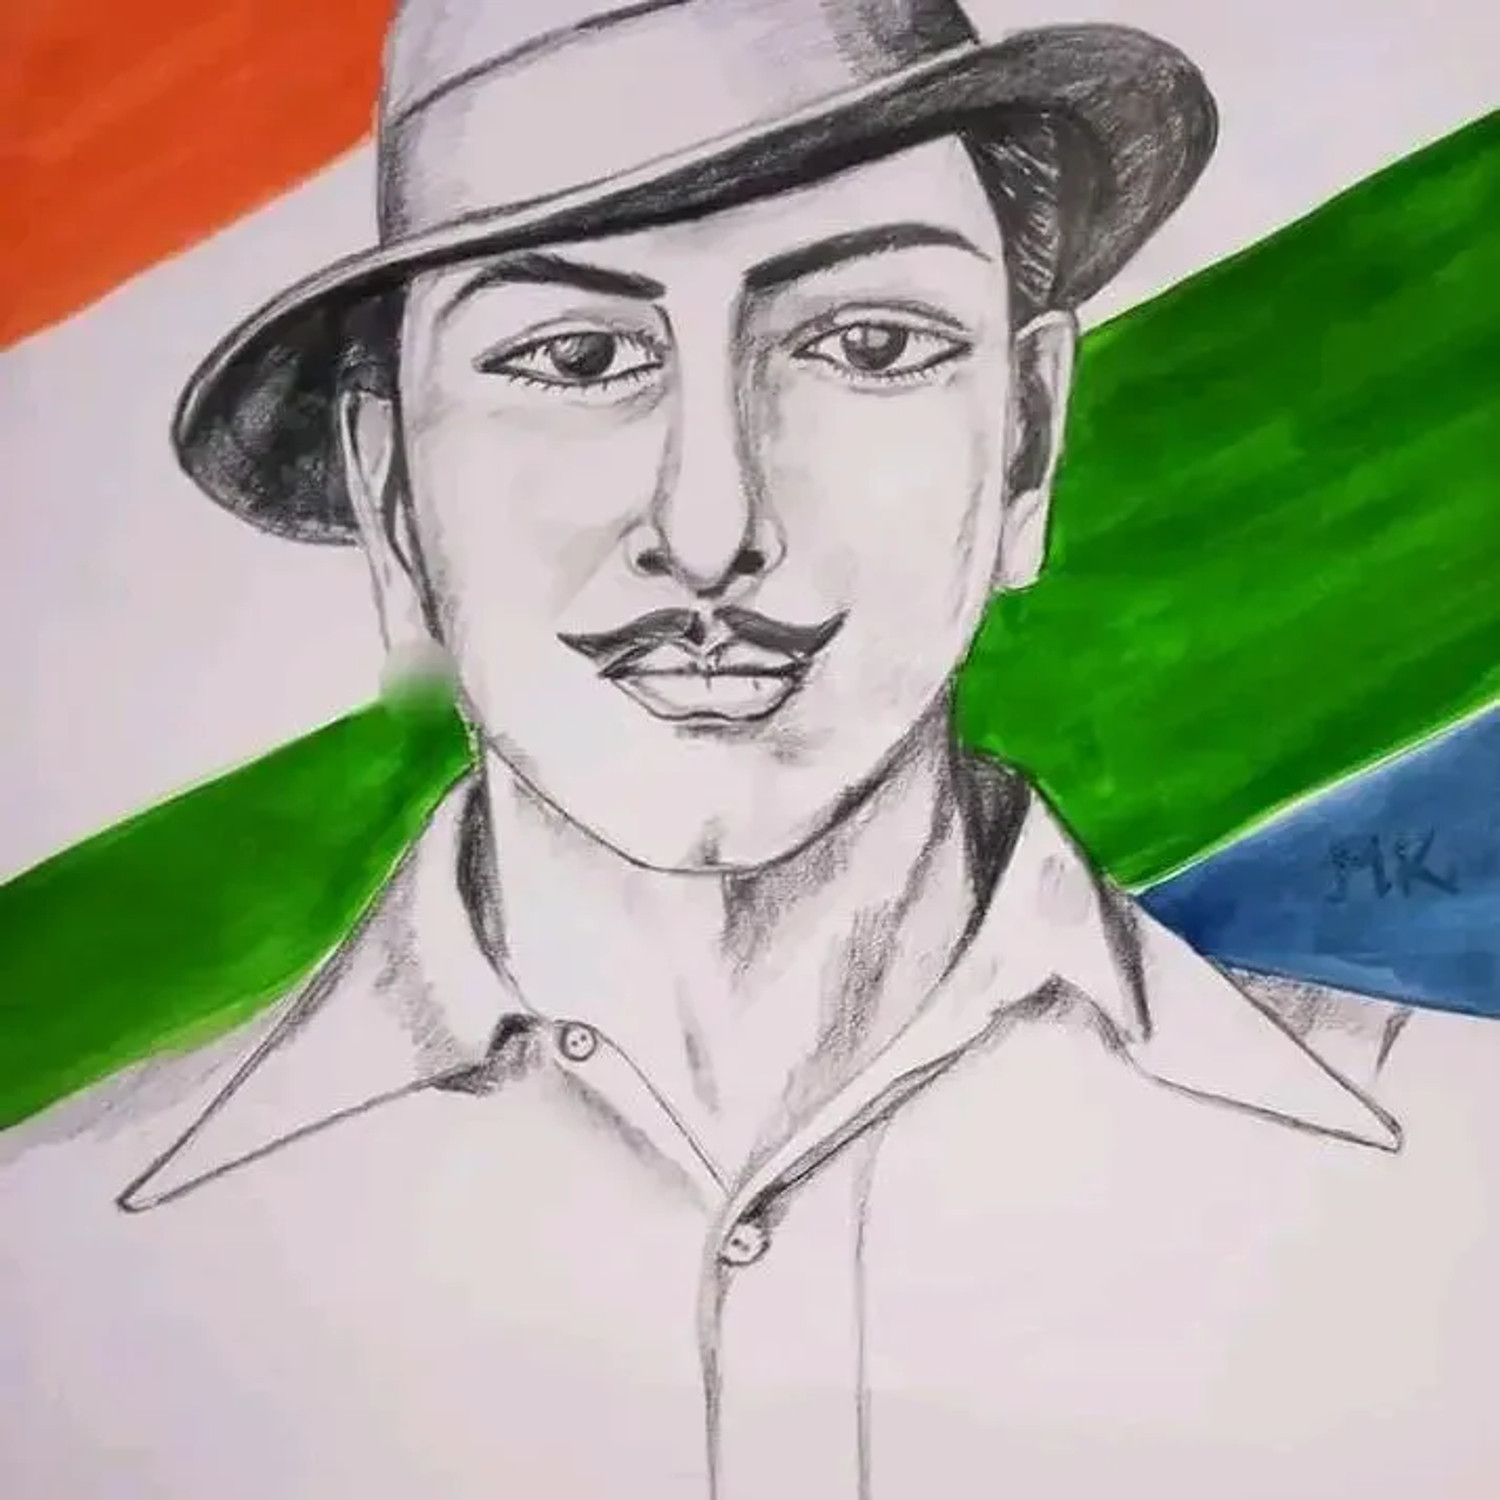 Bhagat singh exhibition: Pakistan displays all records of Bhagat Singh's  case file - The Economic Times